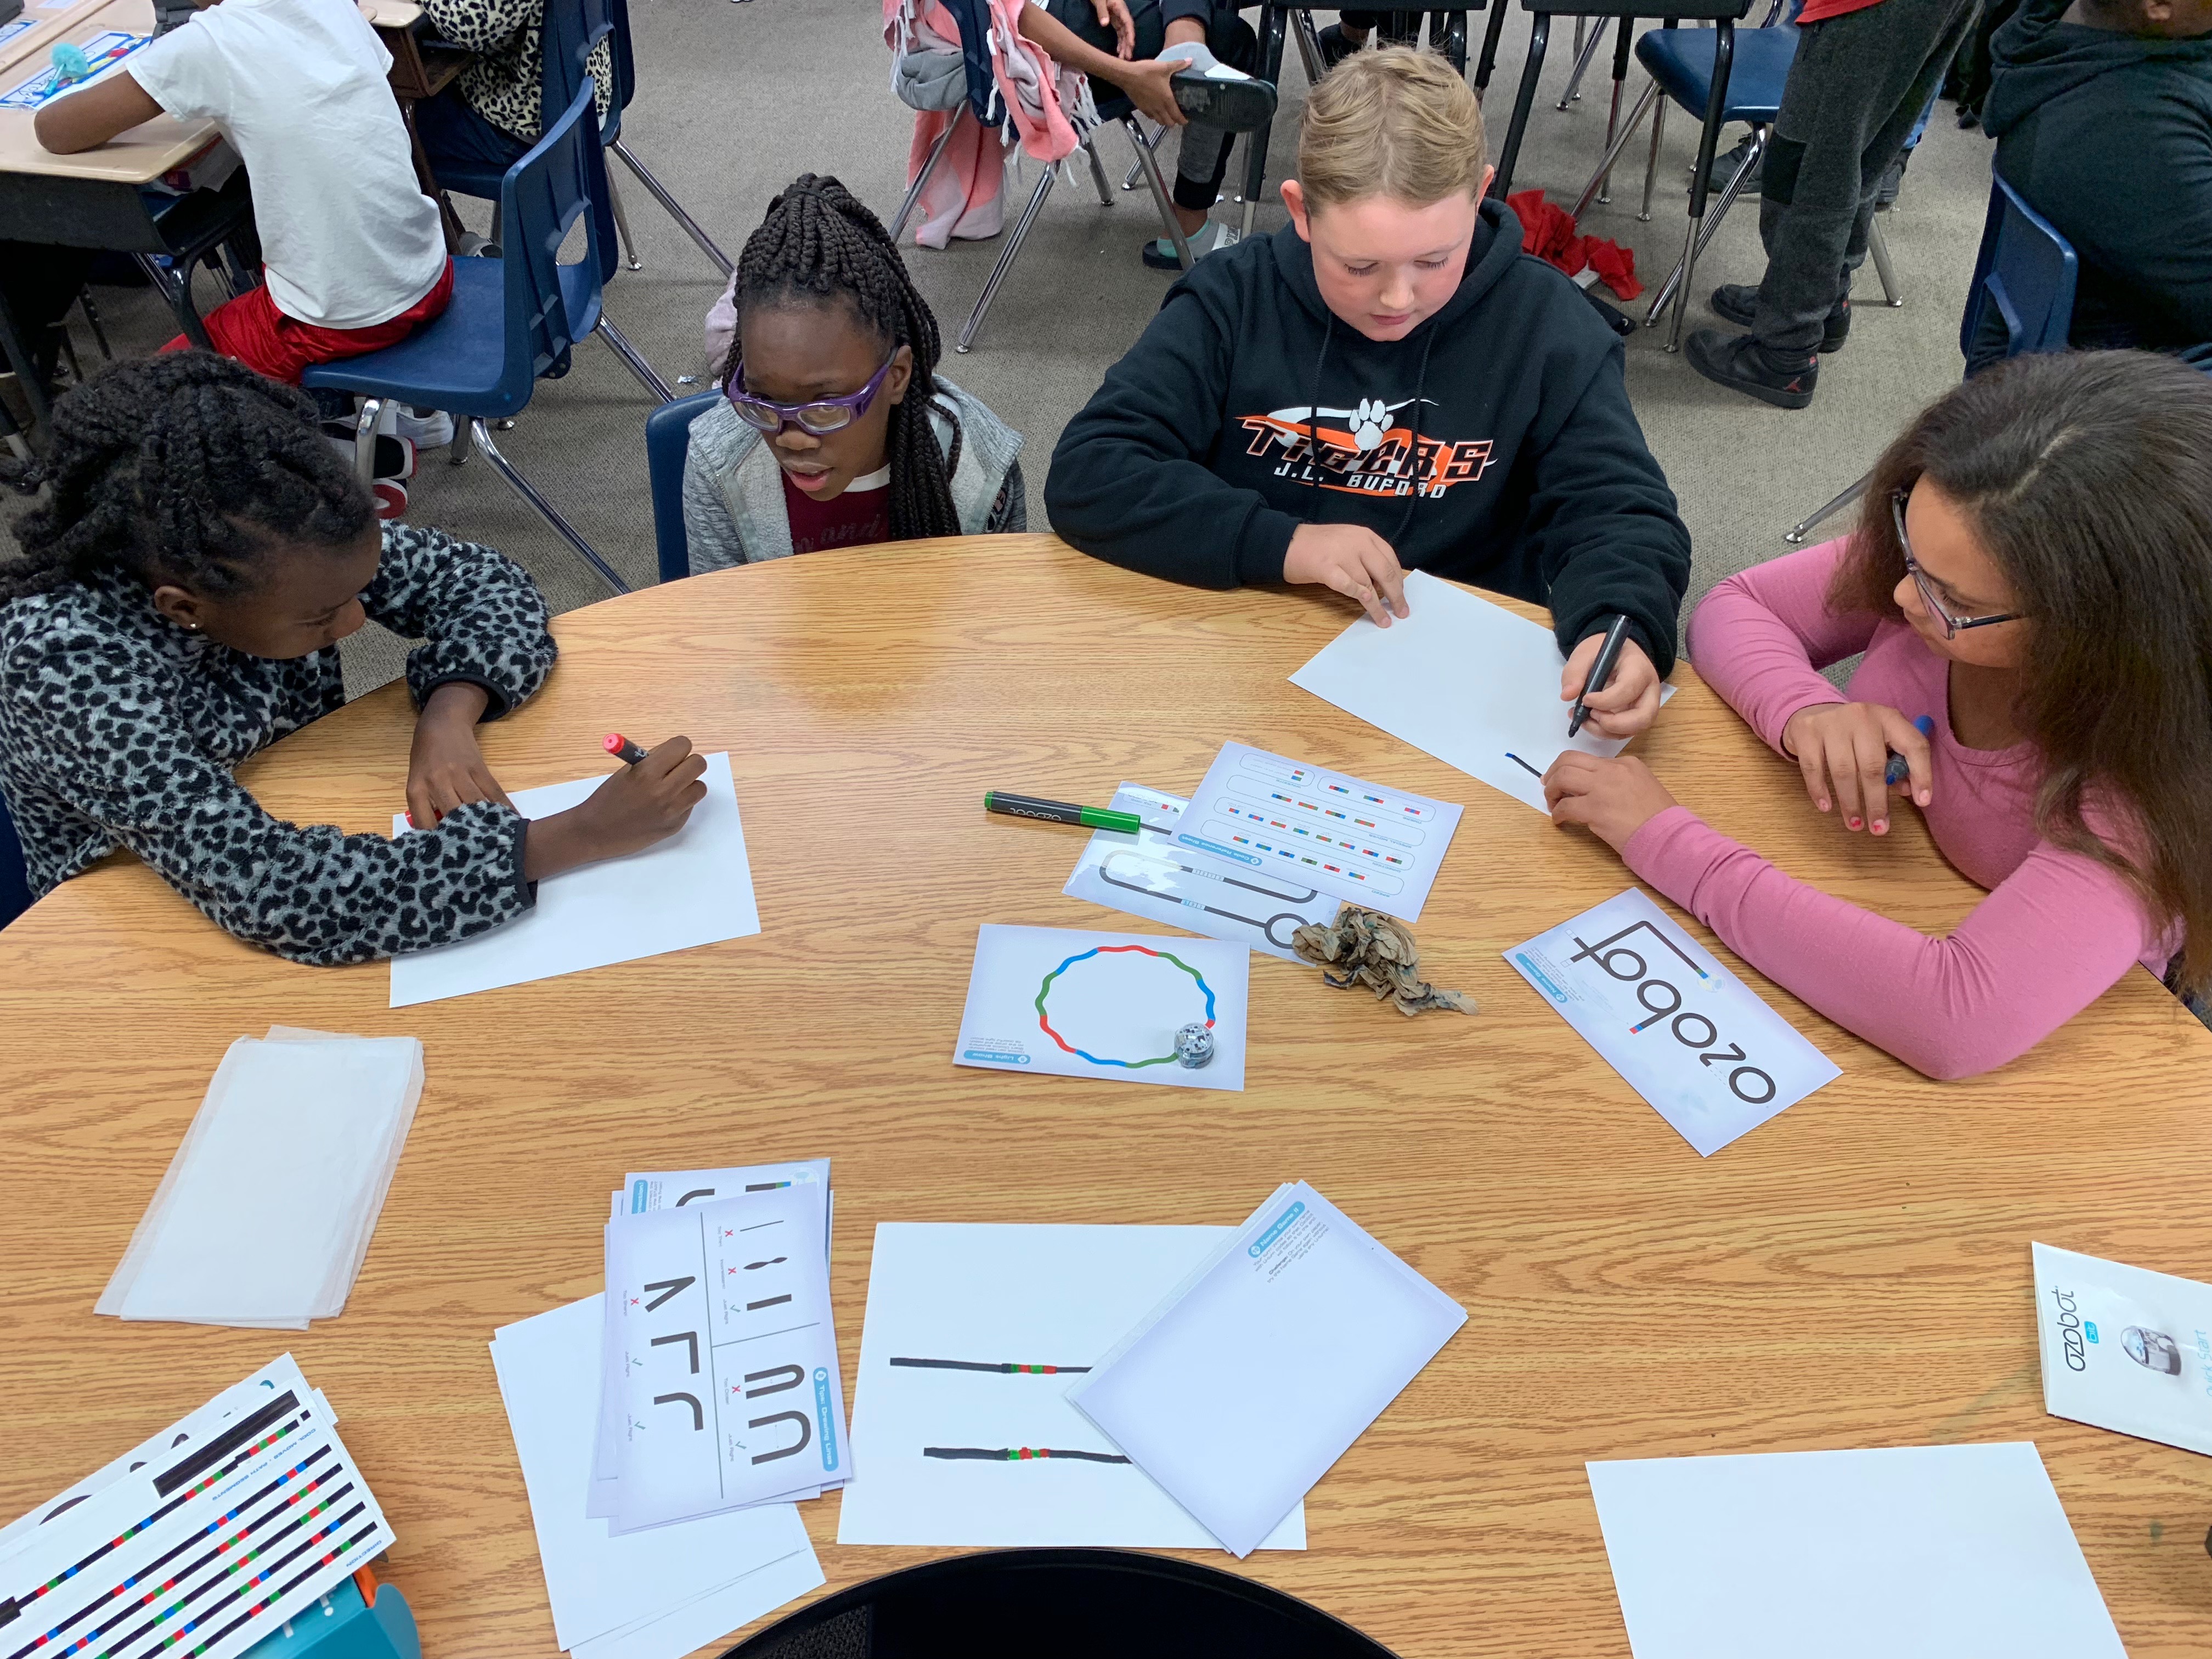  Using Ozobots in the Middle School Classroom